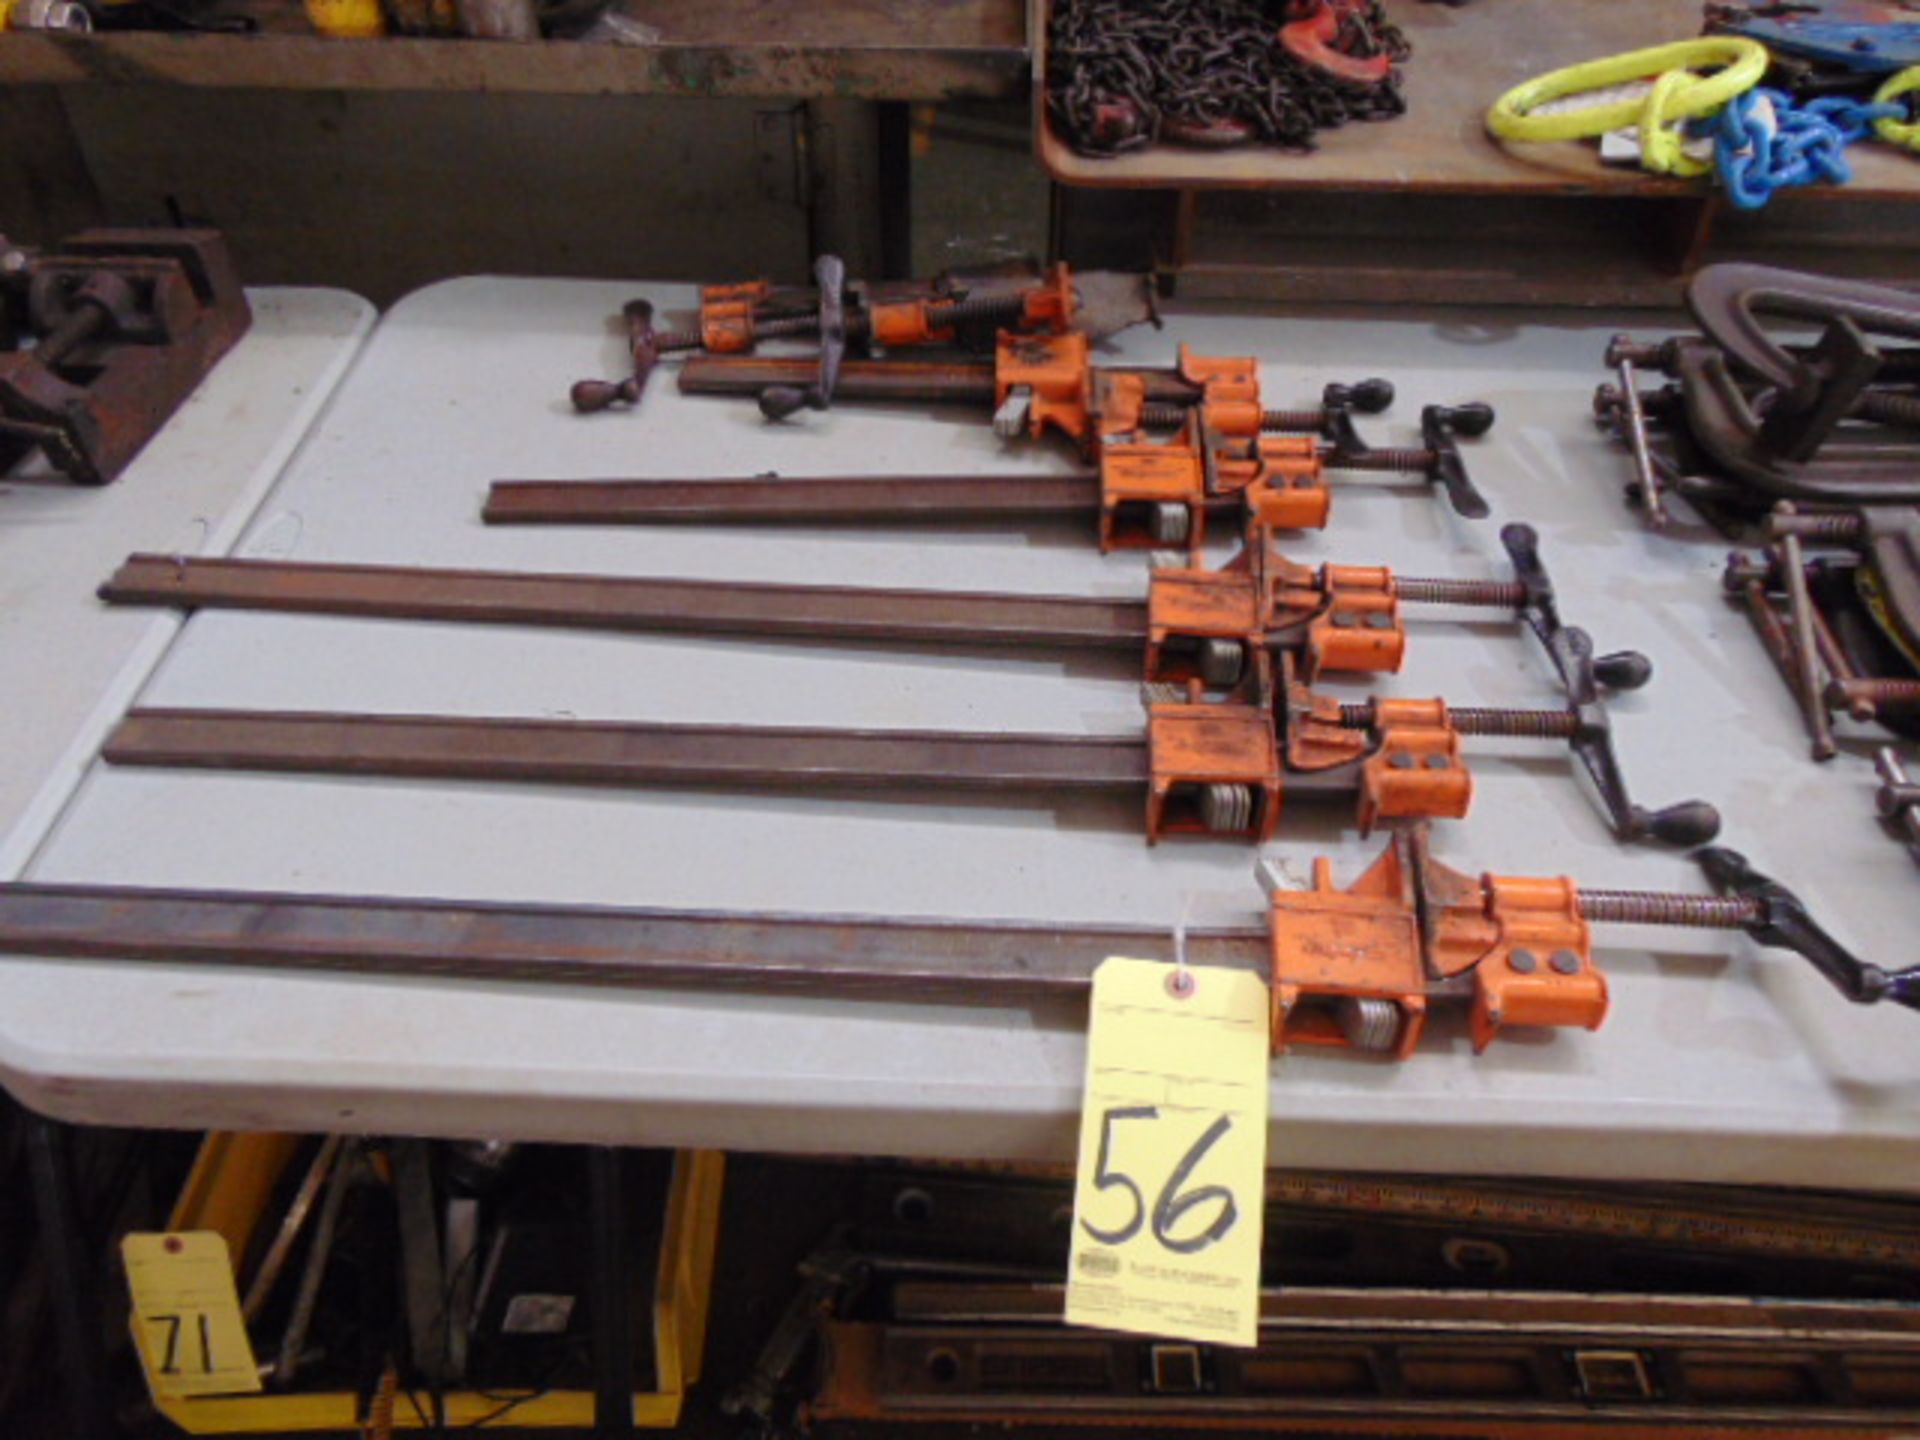 LOT OF BAR CLAMPS, assorted